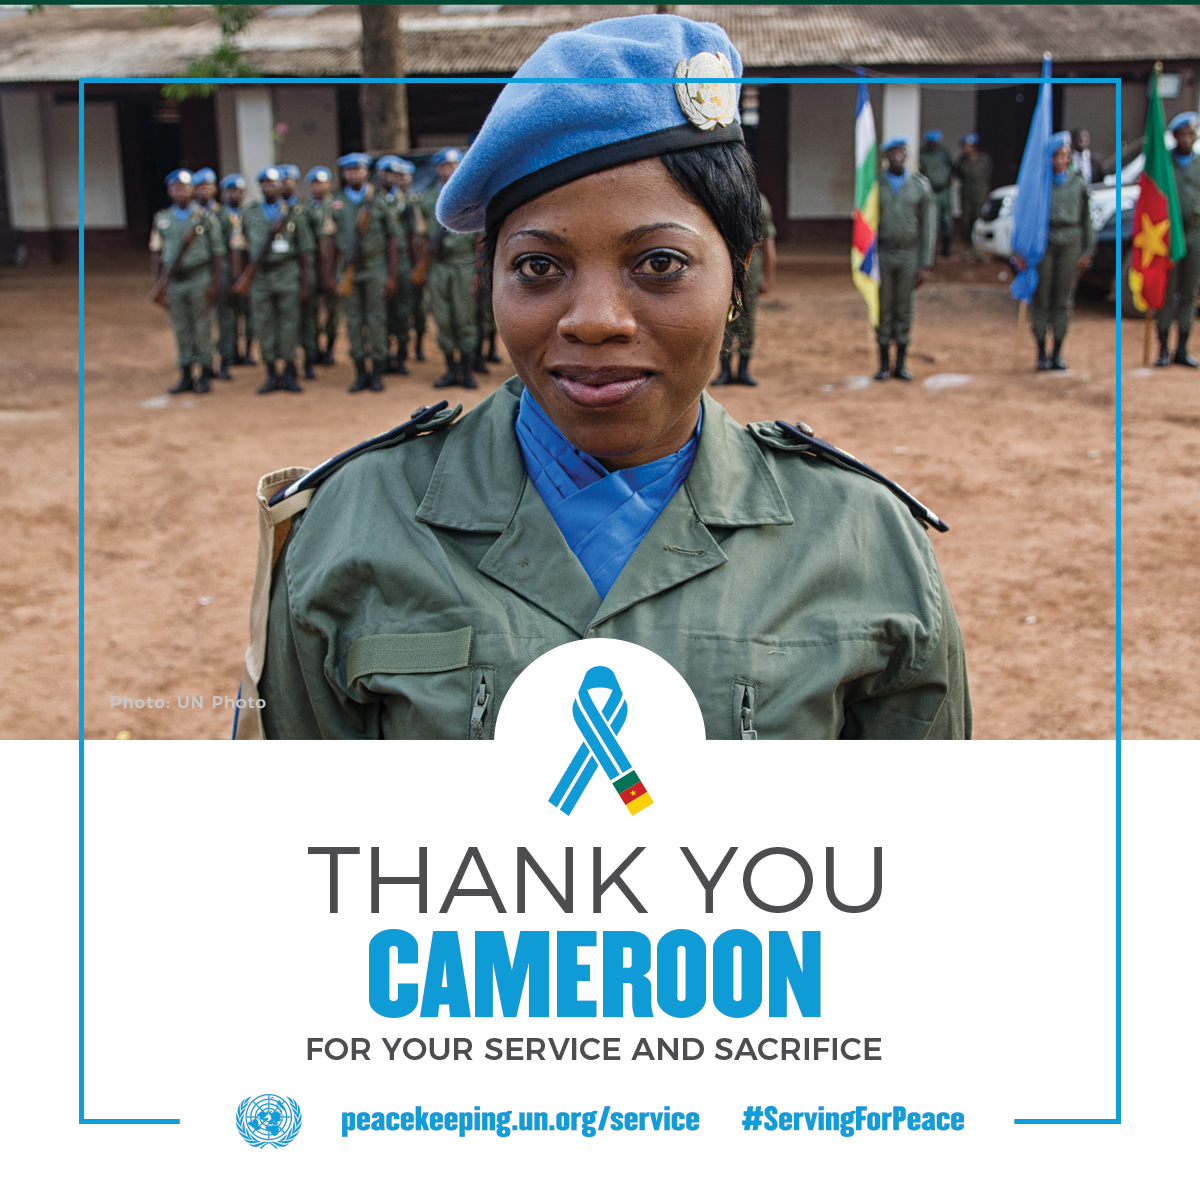 A female peacekeeper from Cameroon